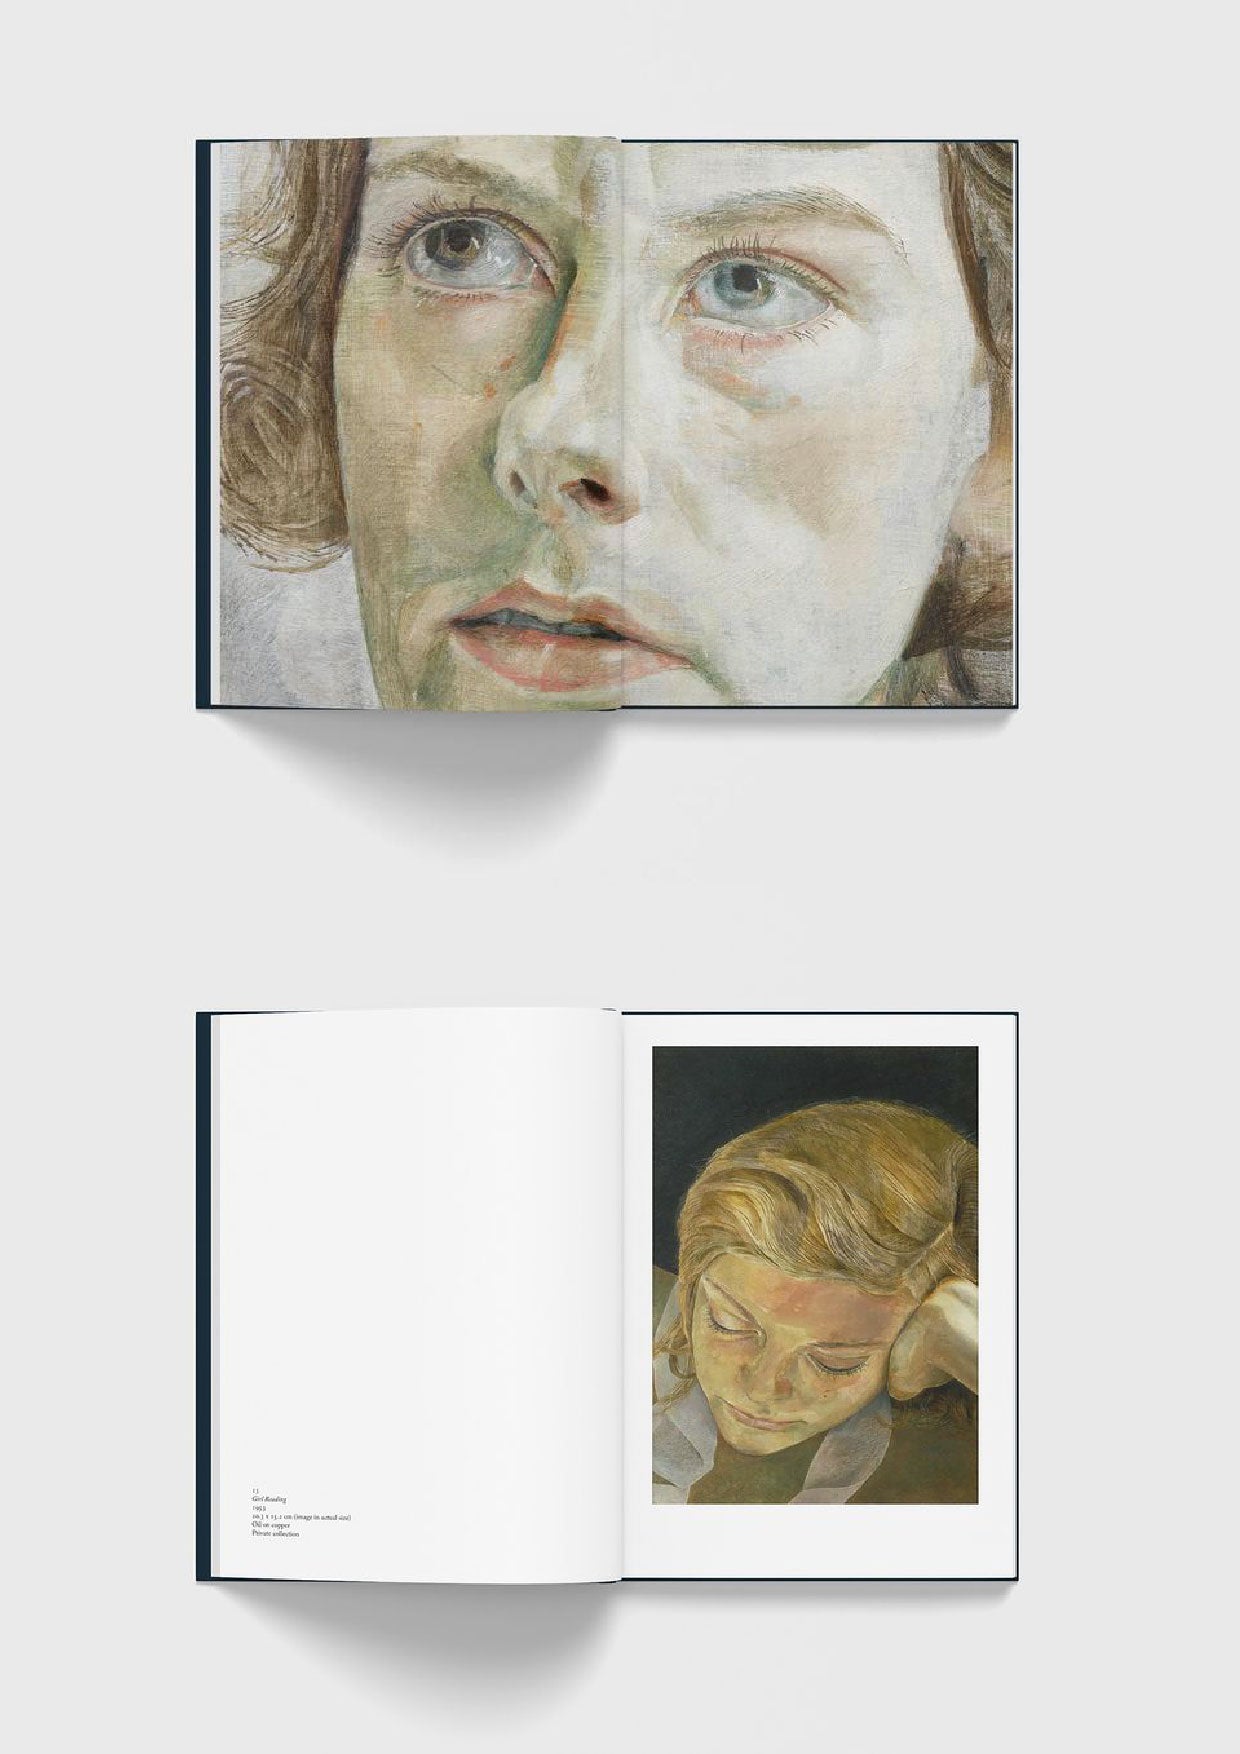 "Lucian Freud. The Copper Paintings"